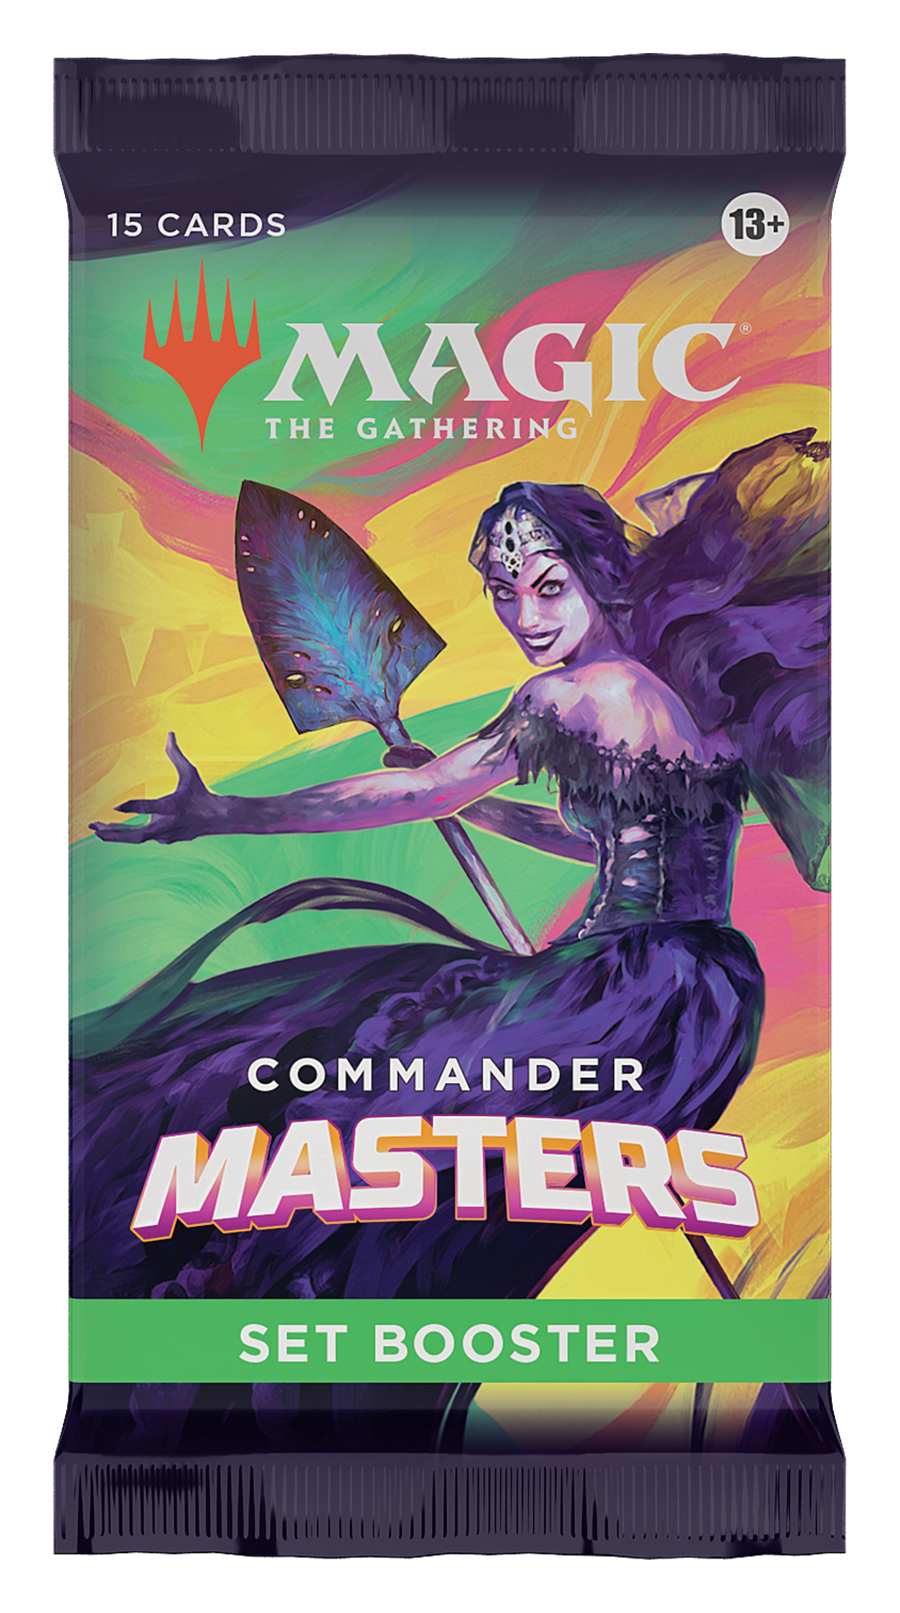 MAGIC THE GATHERING - COMMANDER MASTERS - SET BOOSTER PACK - ENGLISH